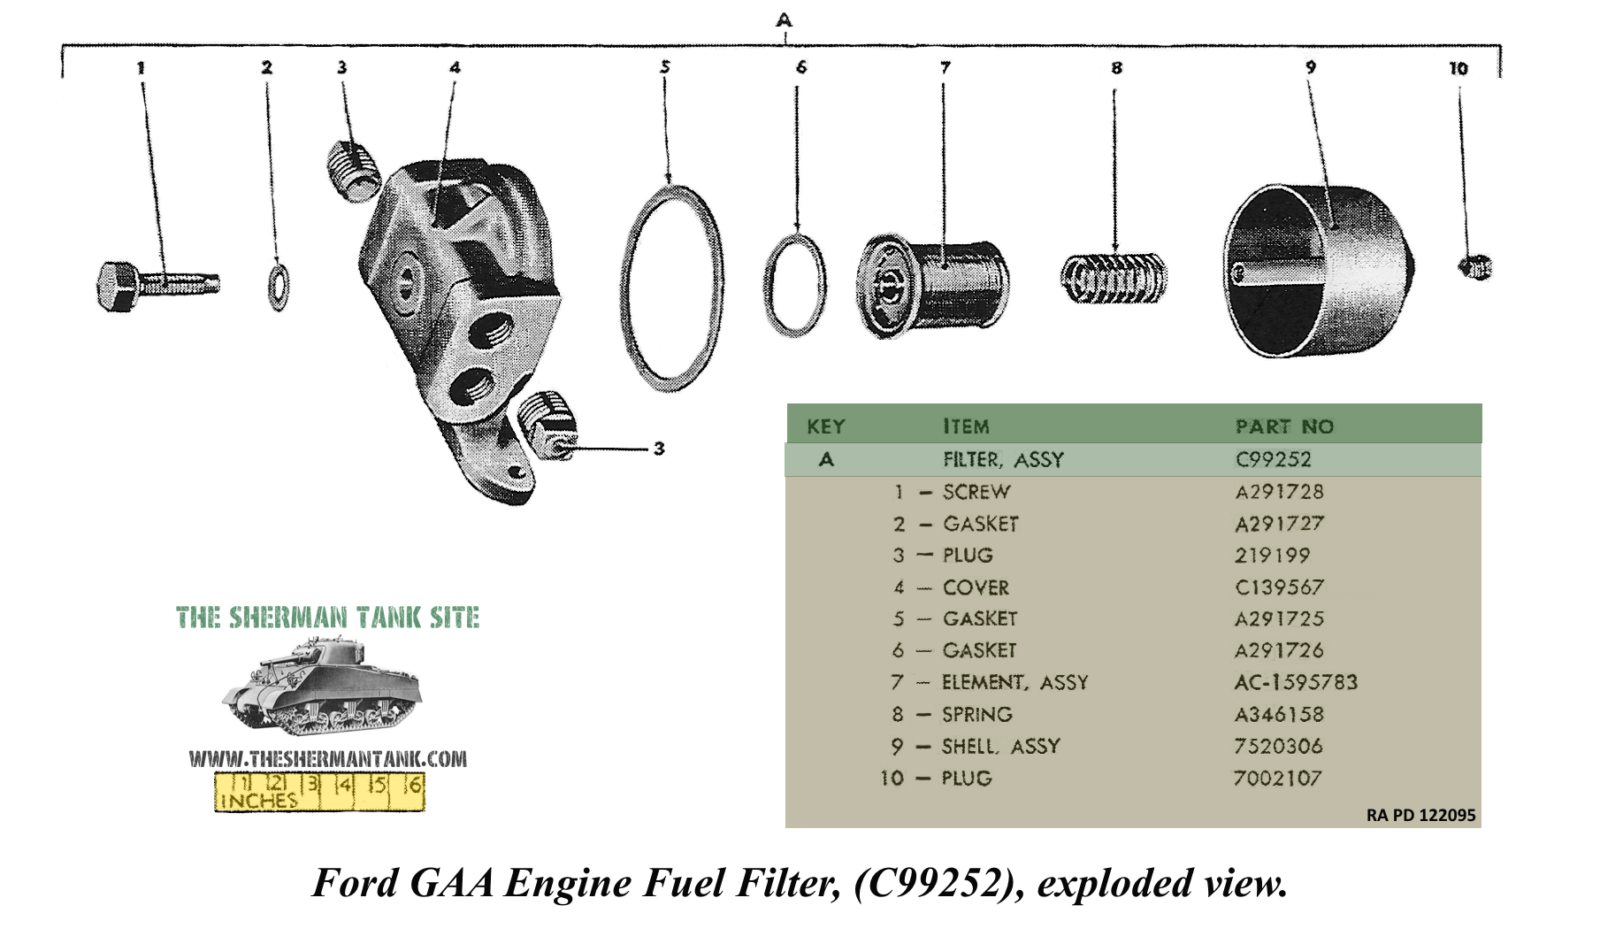 Engine-fuel-filter-c99252-exploded-view-